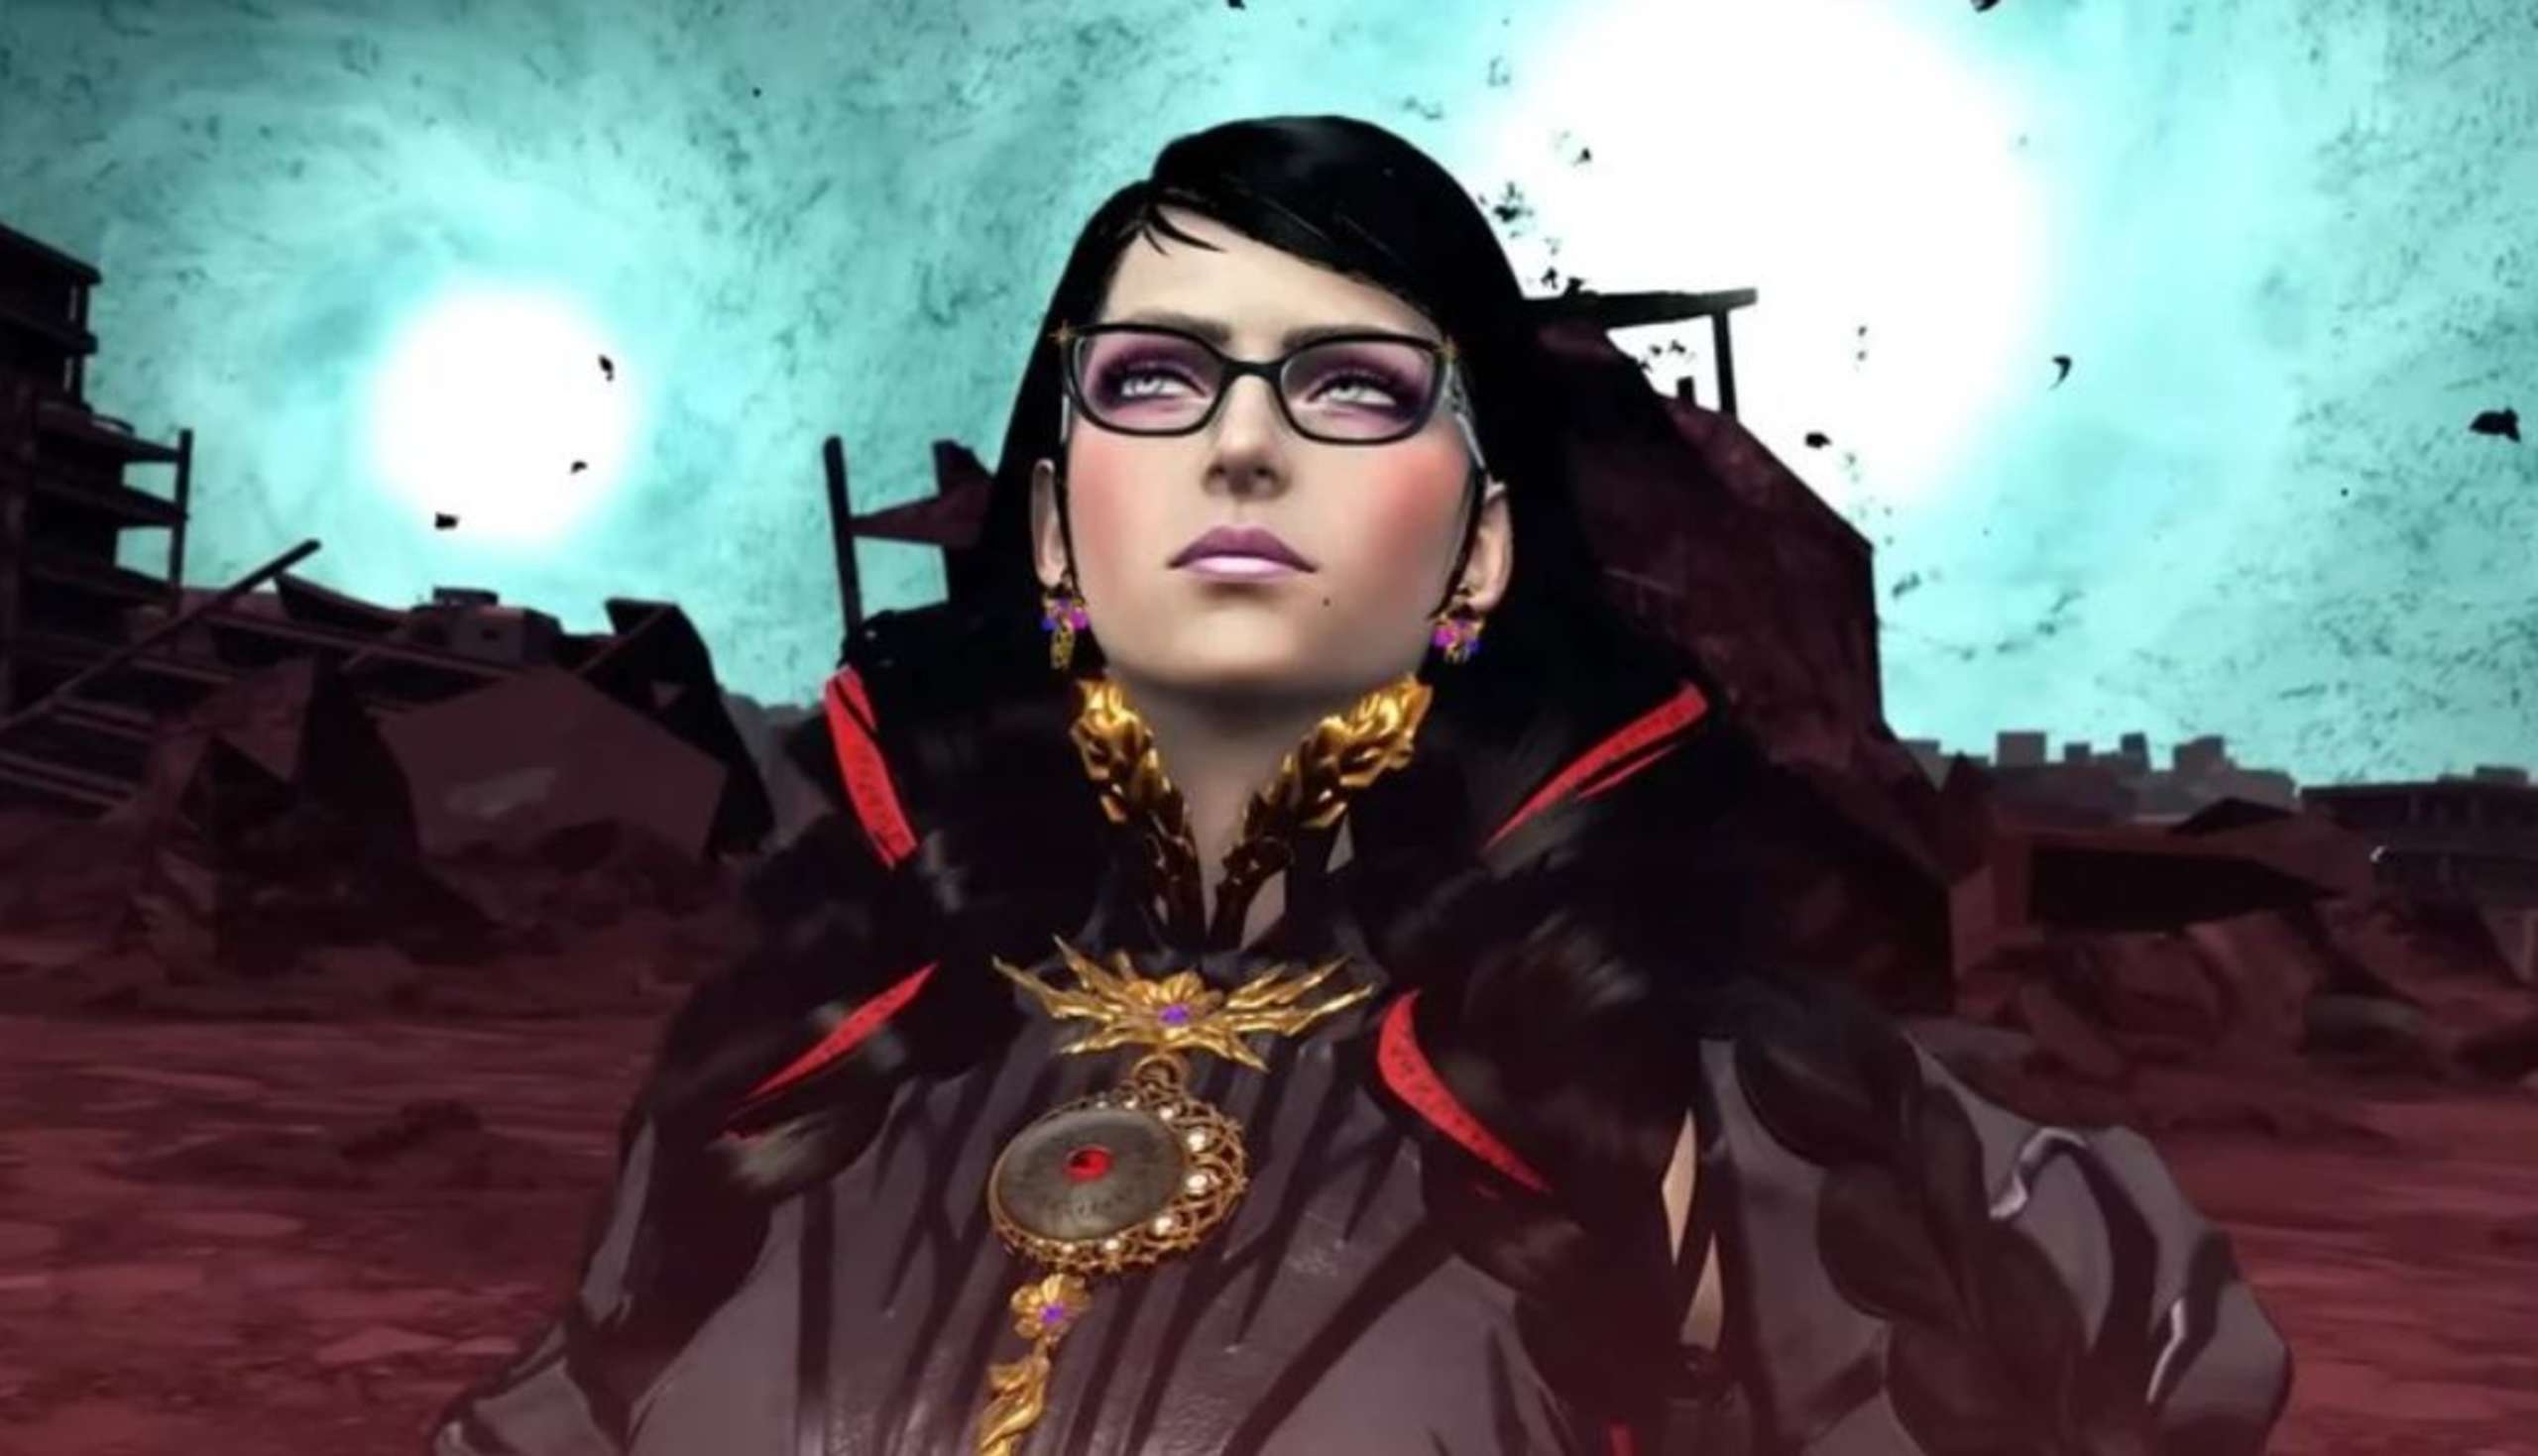 Bayonetta 3 A Week Before The Game’s Official Release, Some Fans Have Already Gotten Their Hands On Copies And Are Spreading Spoilers